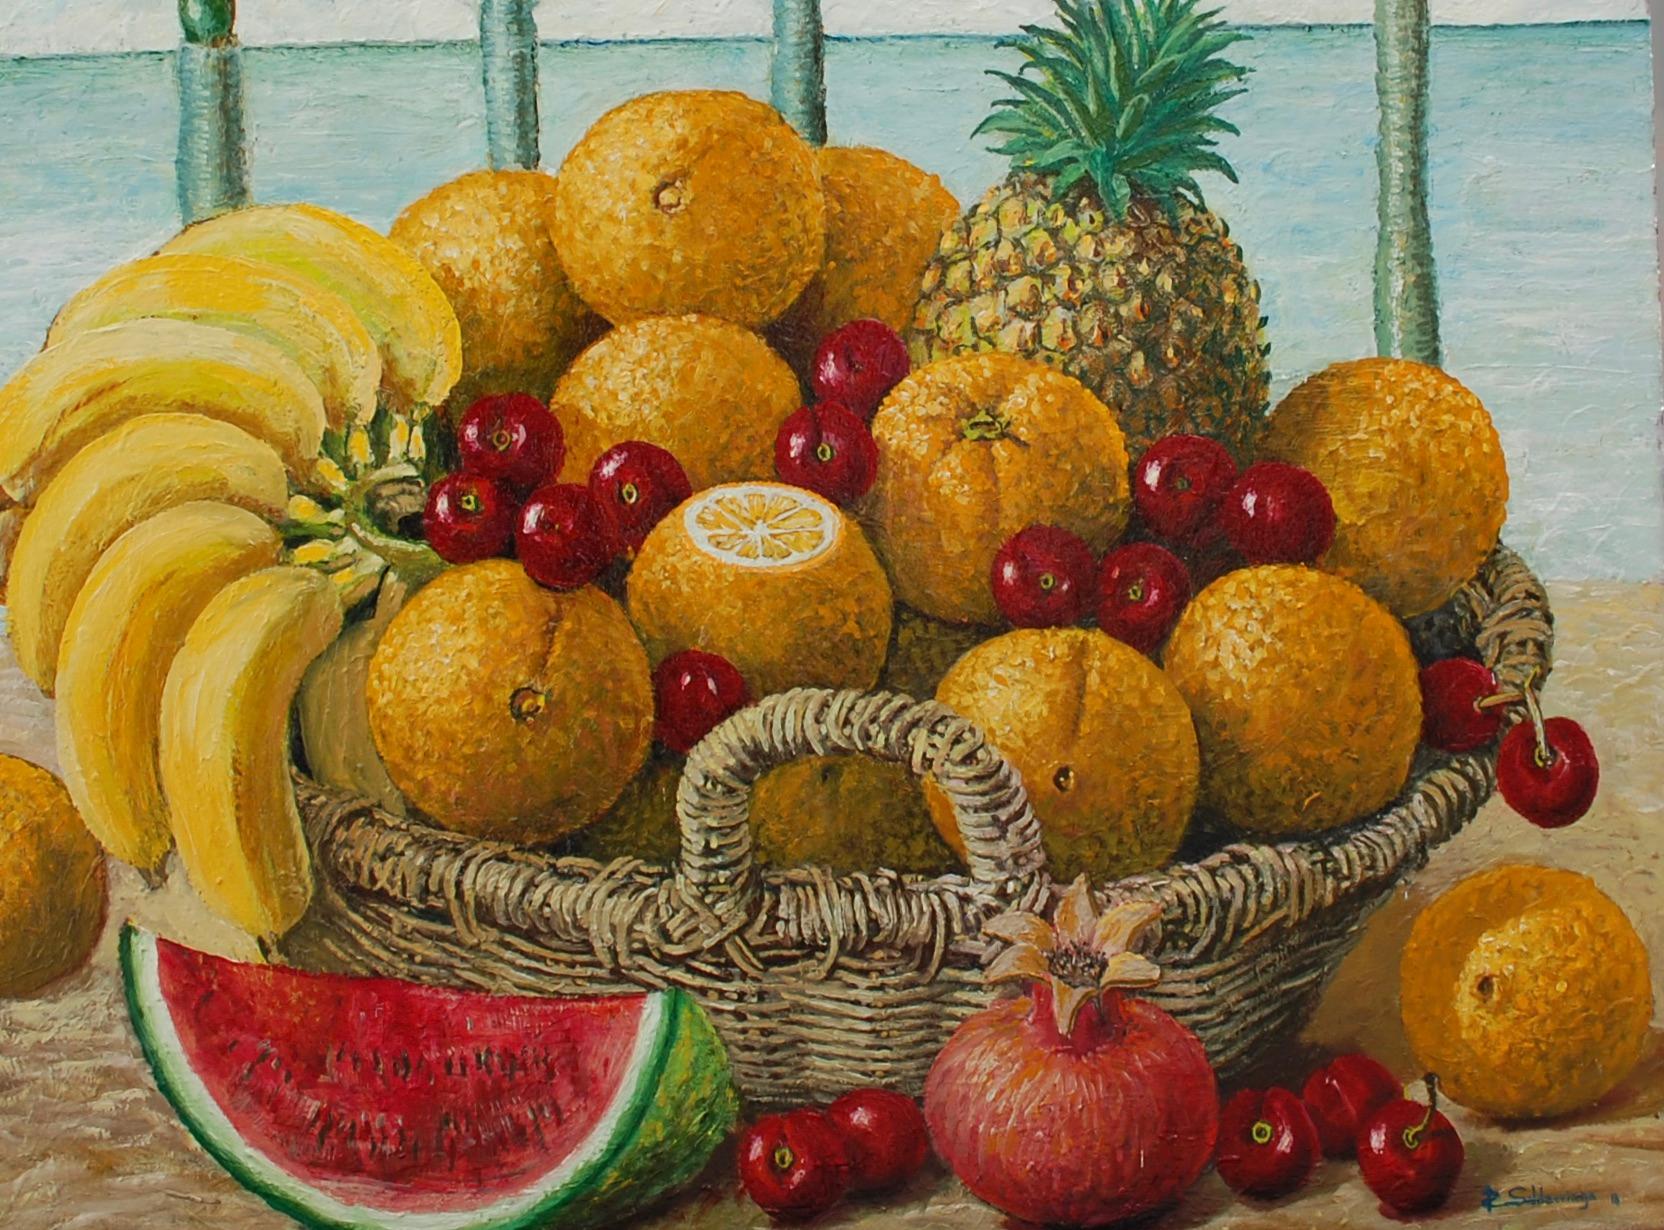  Tropical Fruit In The Basket - Painting by Rafael Saldarriaga